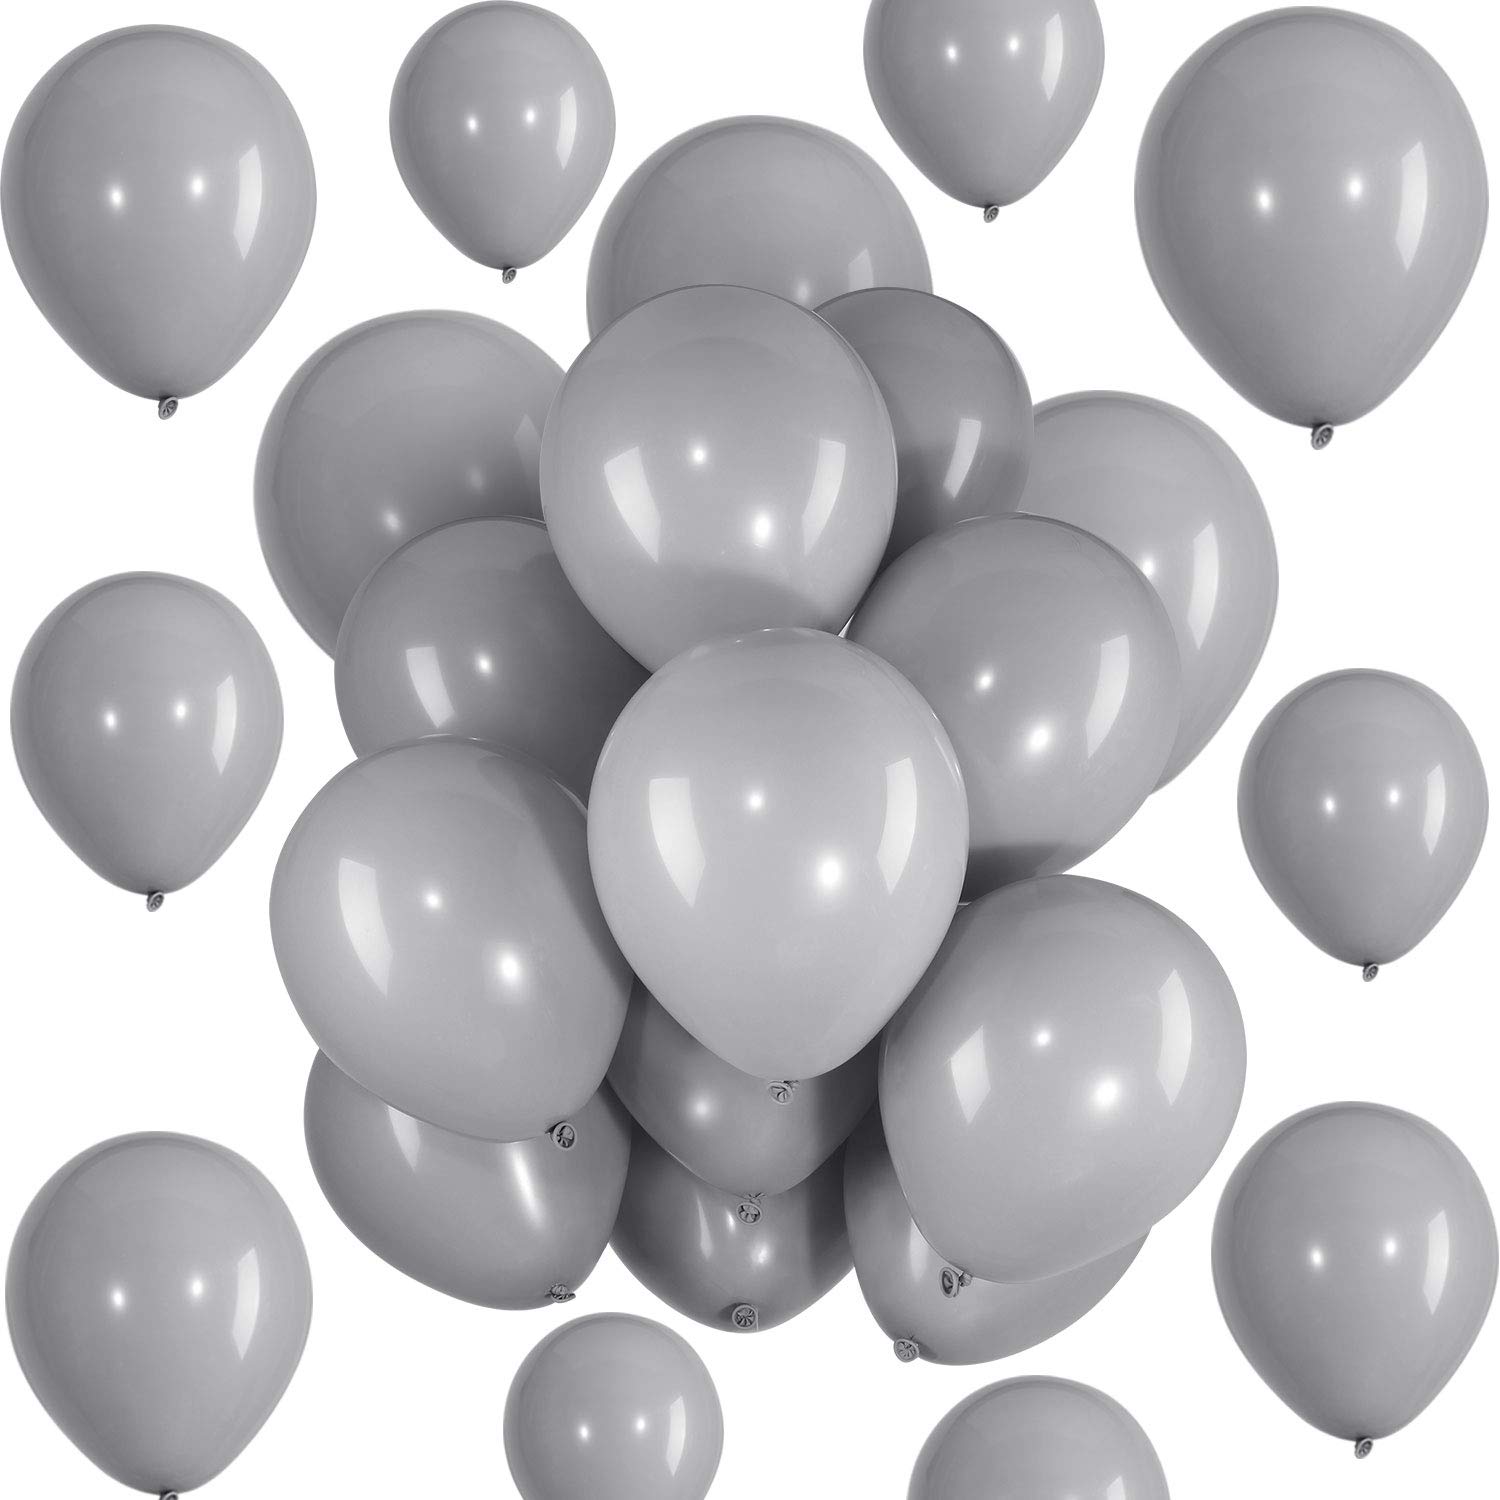 Book Cover Gray Balloons 100 Pack 10 Inch Party Balloons Gray Latex Balloons for Weddings, Birthday Party, Bridal Shower, Party Decoration (10 Inch, Gray) Gray 10 Inch